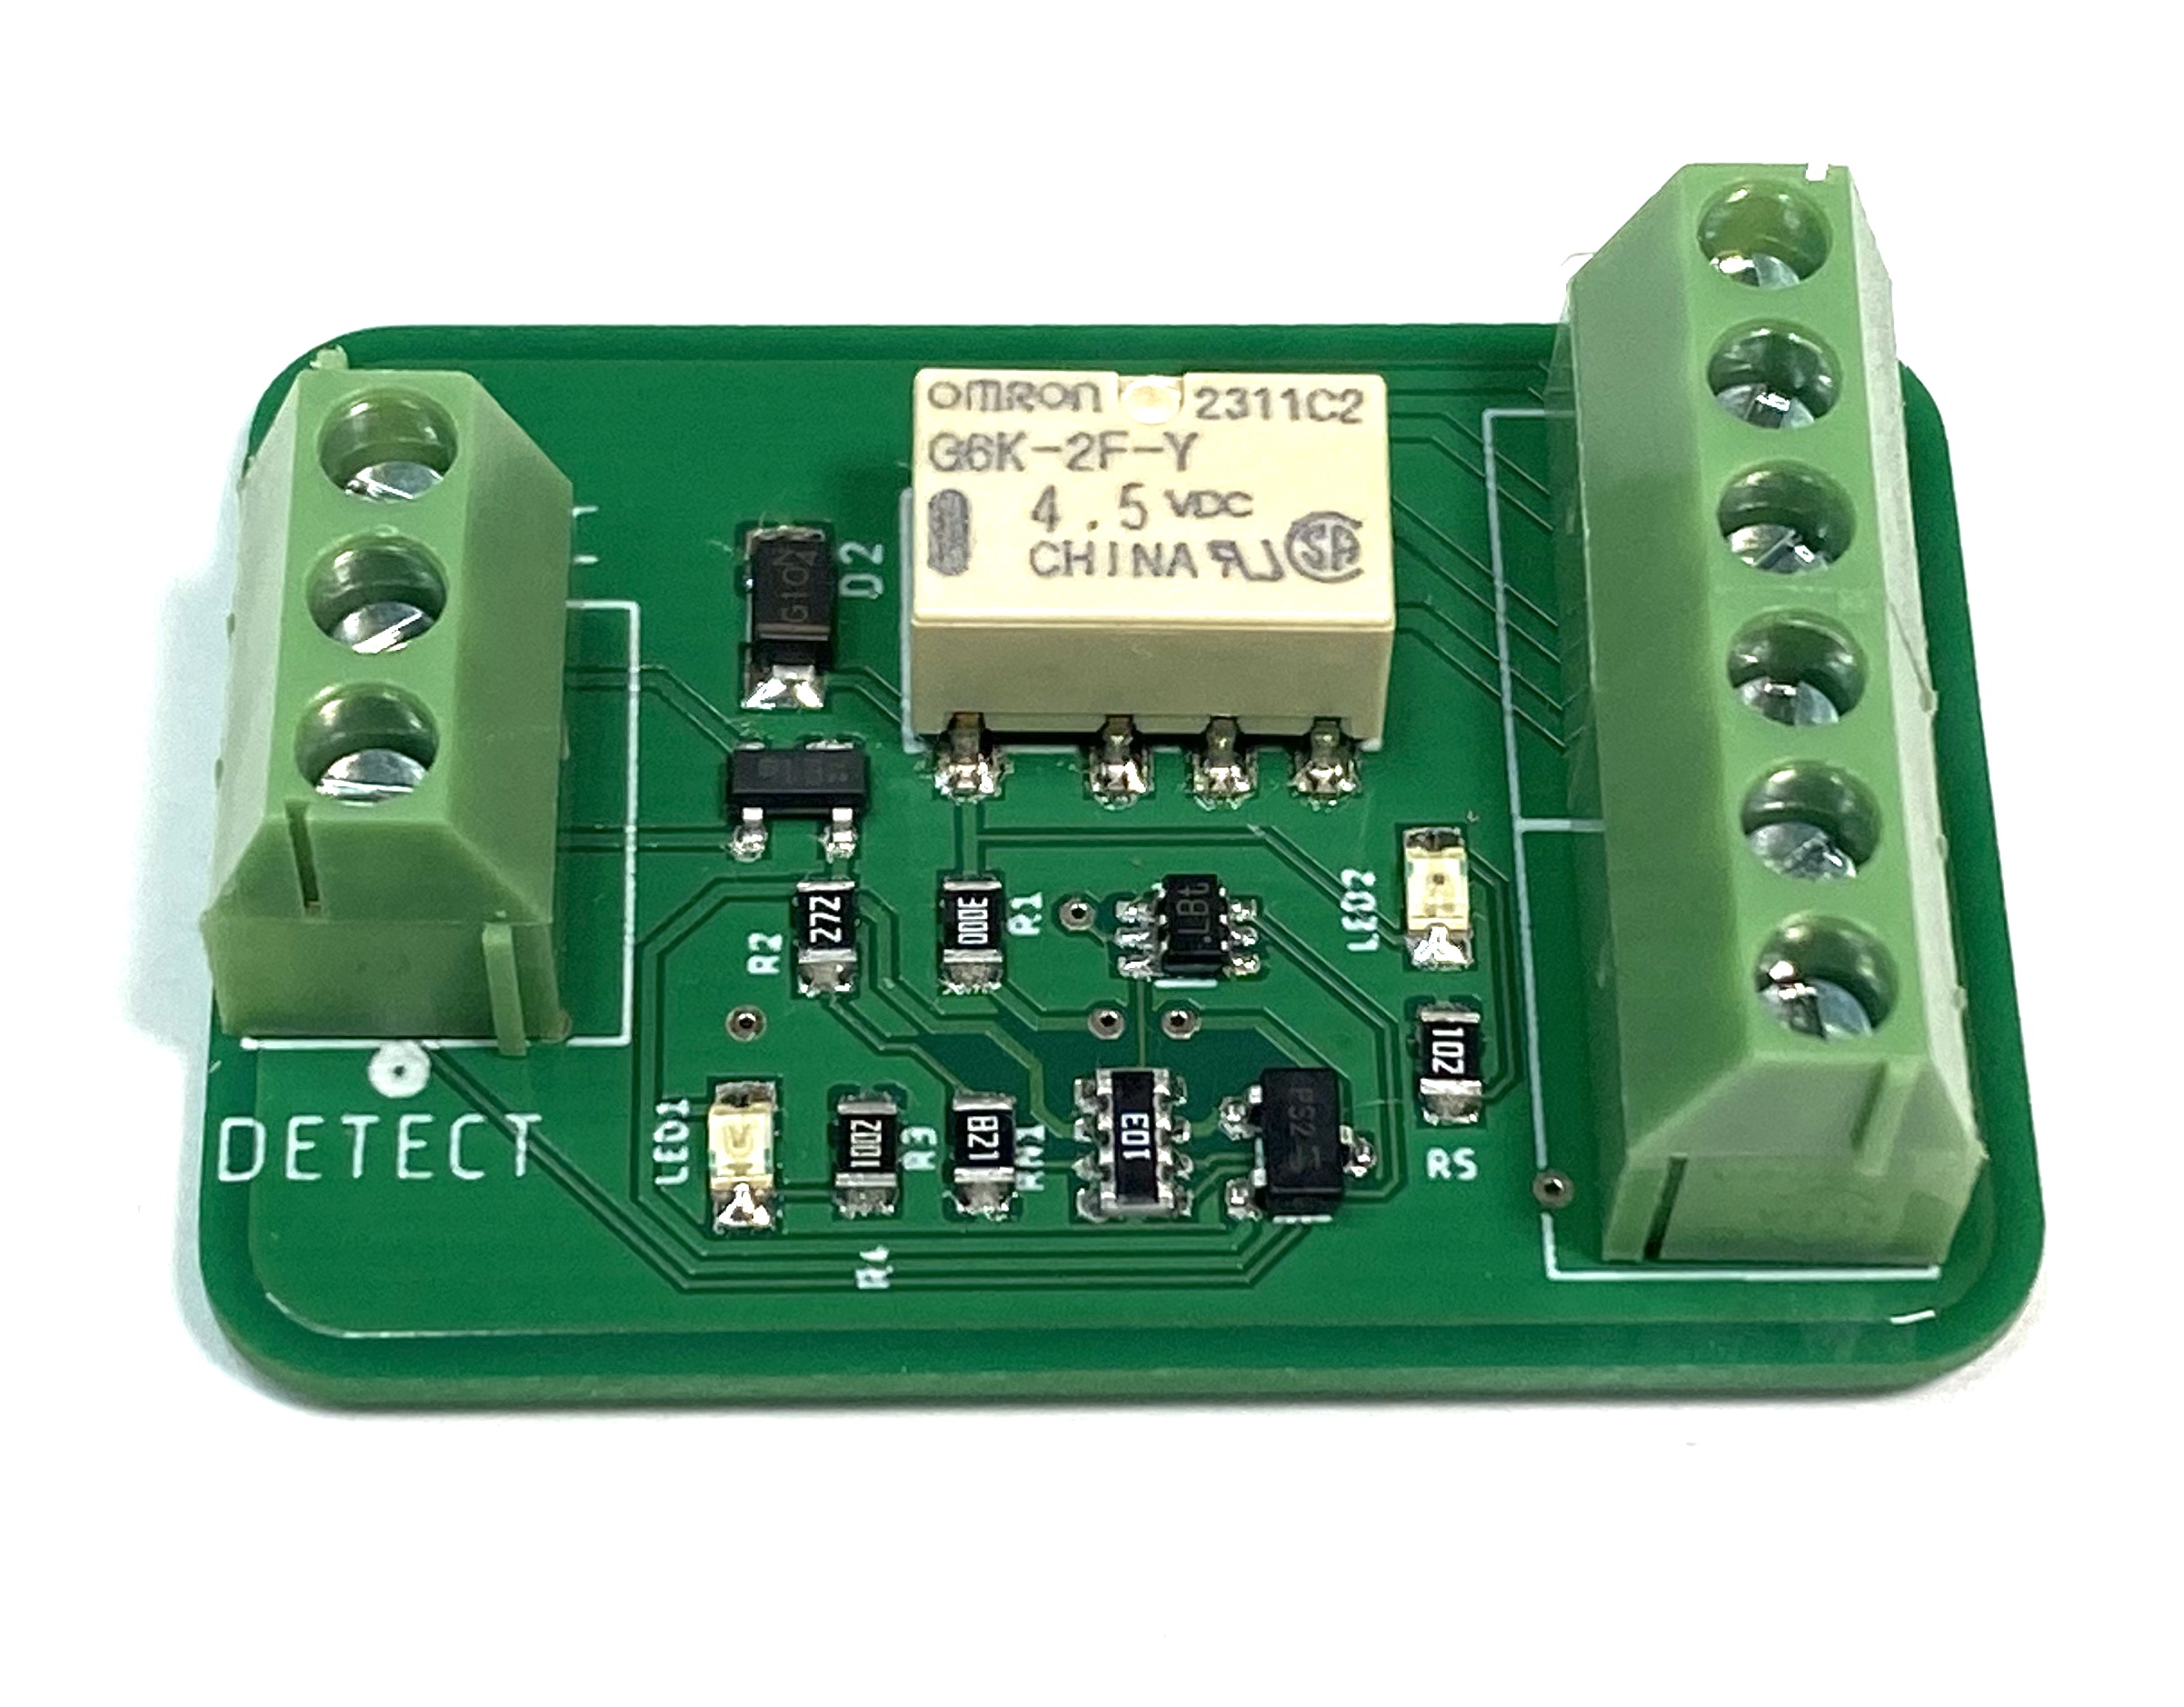 DPDT Relay for Precision Detector - Signaling, Lighting & Animation